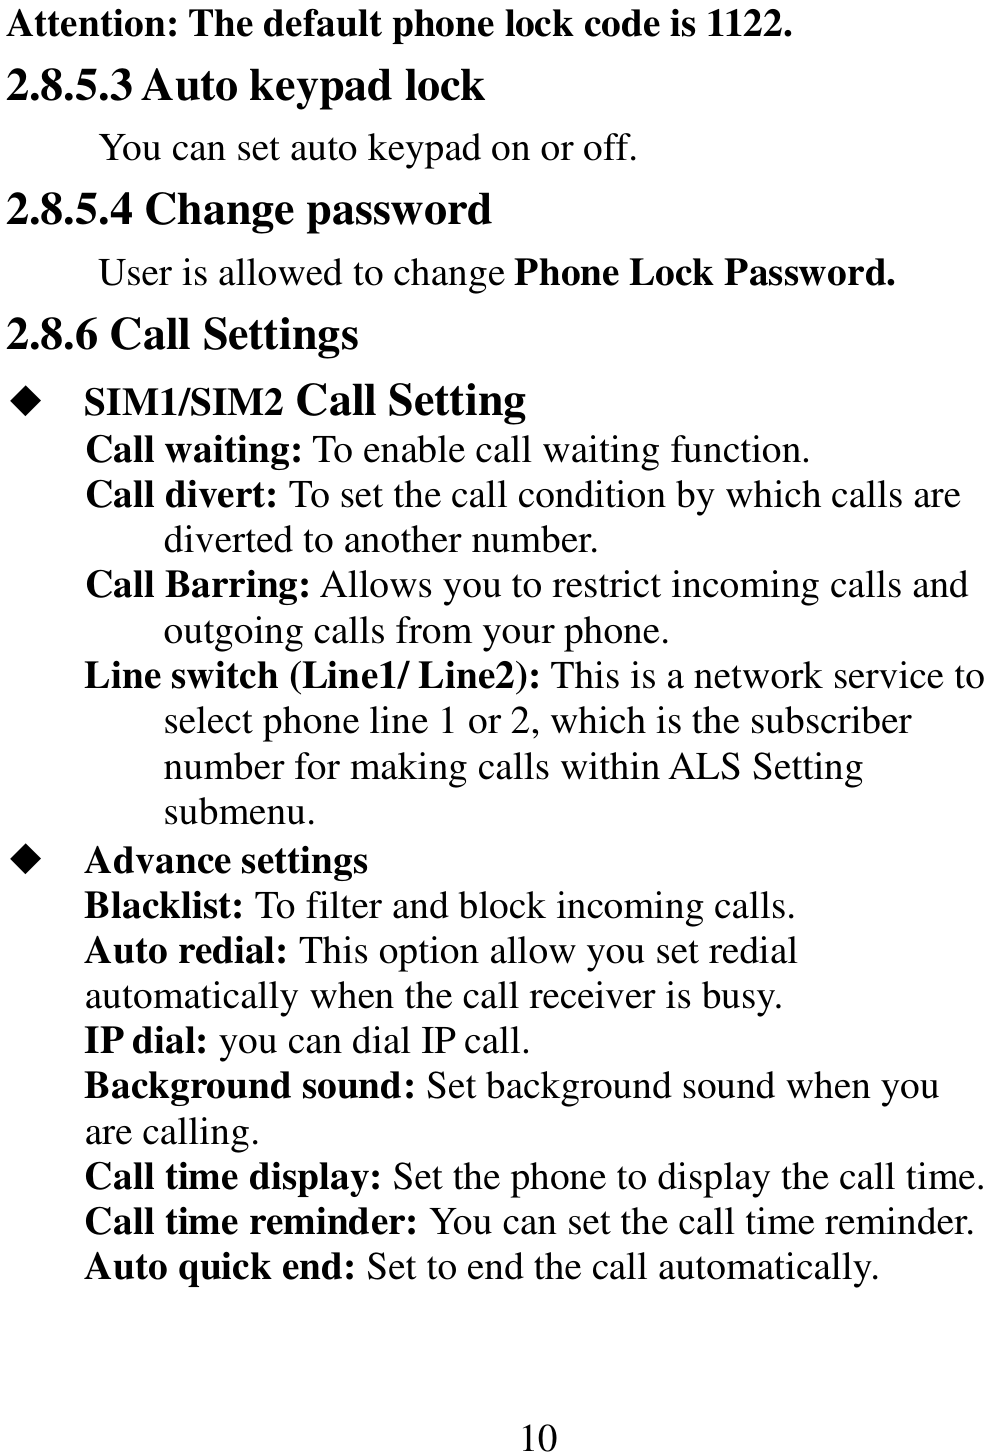                                                       10 Attention: The default phone lock code is 1122.  2.8.5.3 Auto keypad lock You can set auto keypad on or off. 2.8.5.4 Change password User is allowed to change Phone Lock Password. 2.8.6 Call Settings ◆ SIM1/SIM2 Call Setting Call waiting: To enable call waiting function. Call divert: To set the call condition by which calls are diverted to another number. Call Barring: Allows you to restrict incoming calls and outgoing calls from your phone. Line switch (Line1/ Line2): This is a network service to select phone line 1 or 2, which is the subscriber number for making calls within ALS Setting submenu. ◆ Advance settings Blacklist: To filter and block incoming calls. Auto redial: This option allow you set redial automatically when the call receiver is busy. IP dial: you can dial IP call. Background sound: Set background sound when you are calling. Call time display: Set the phone to display the call time. Call time reminder: You can set the call time reminder.   Auto quick end: Set to end the call automatically. 